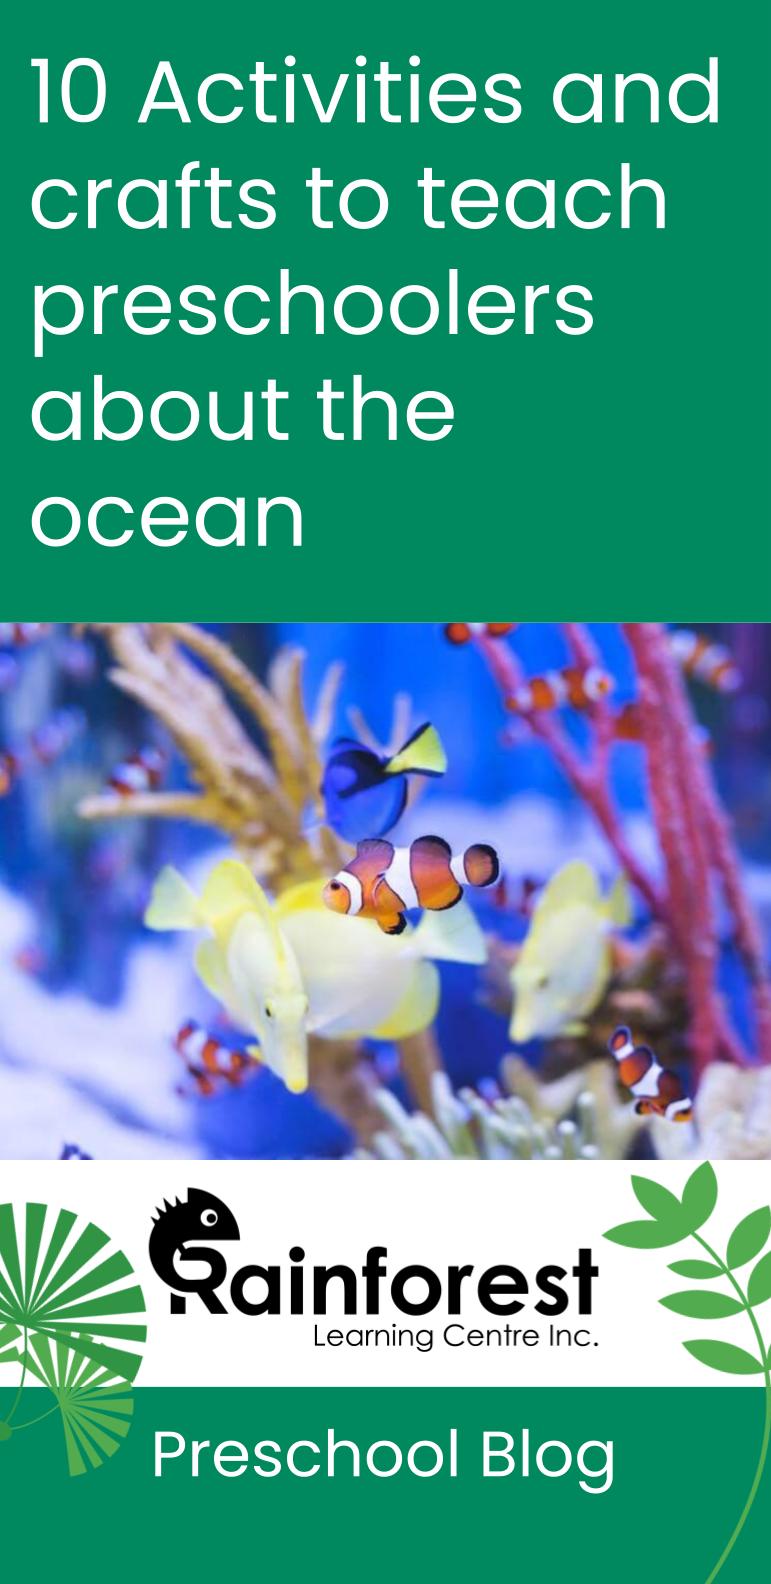 10 activities and crafts to teach preschoolers about the ocean - blog pinterest image